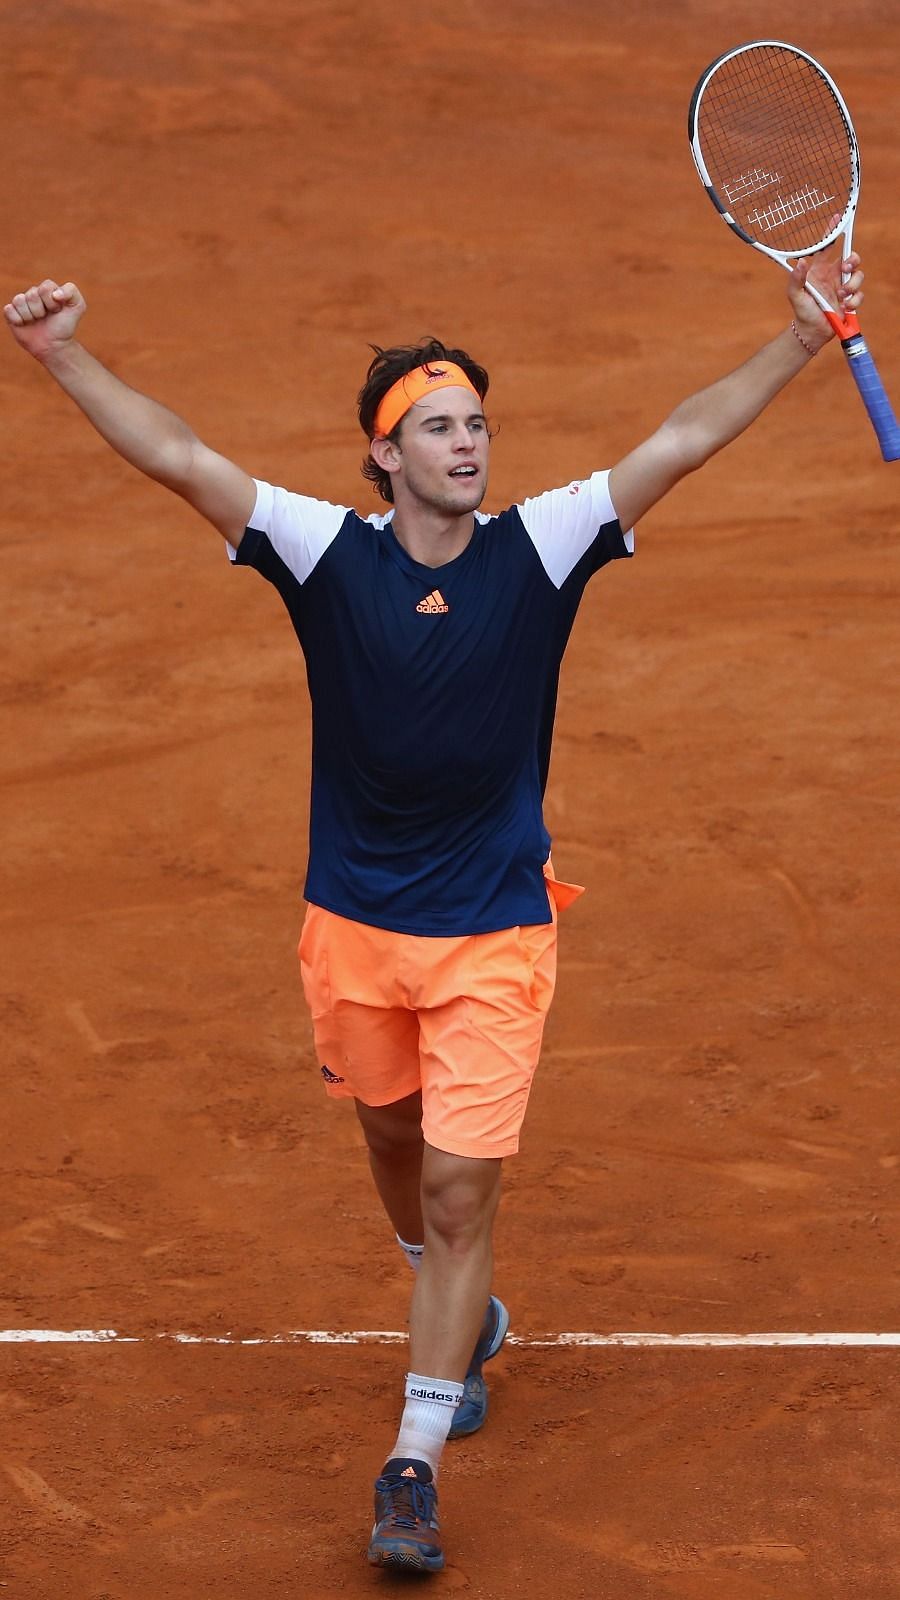 Rio Open 2020, Round of 16 Dominic Thiem vs Jaume Munar Where to watch and Live Stream details